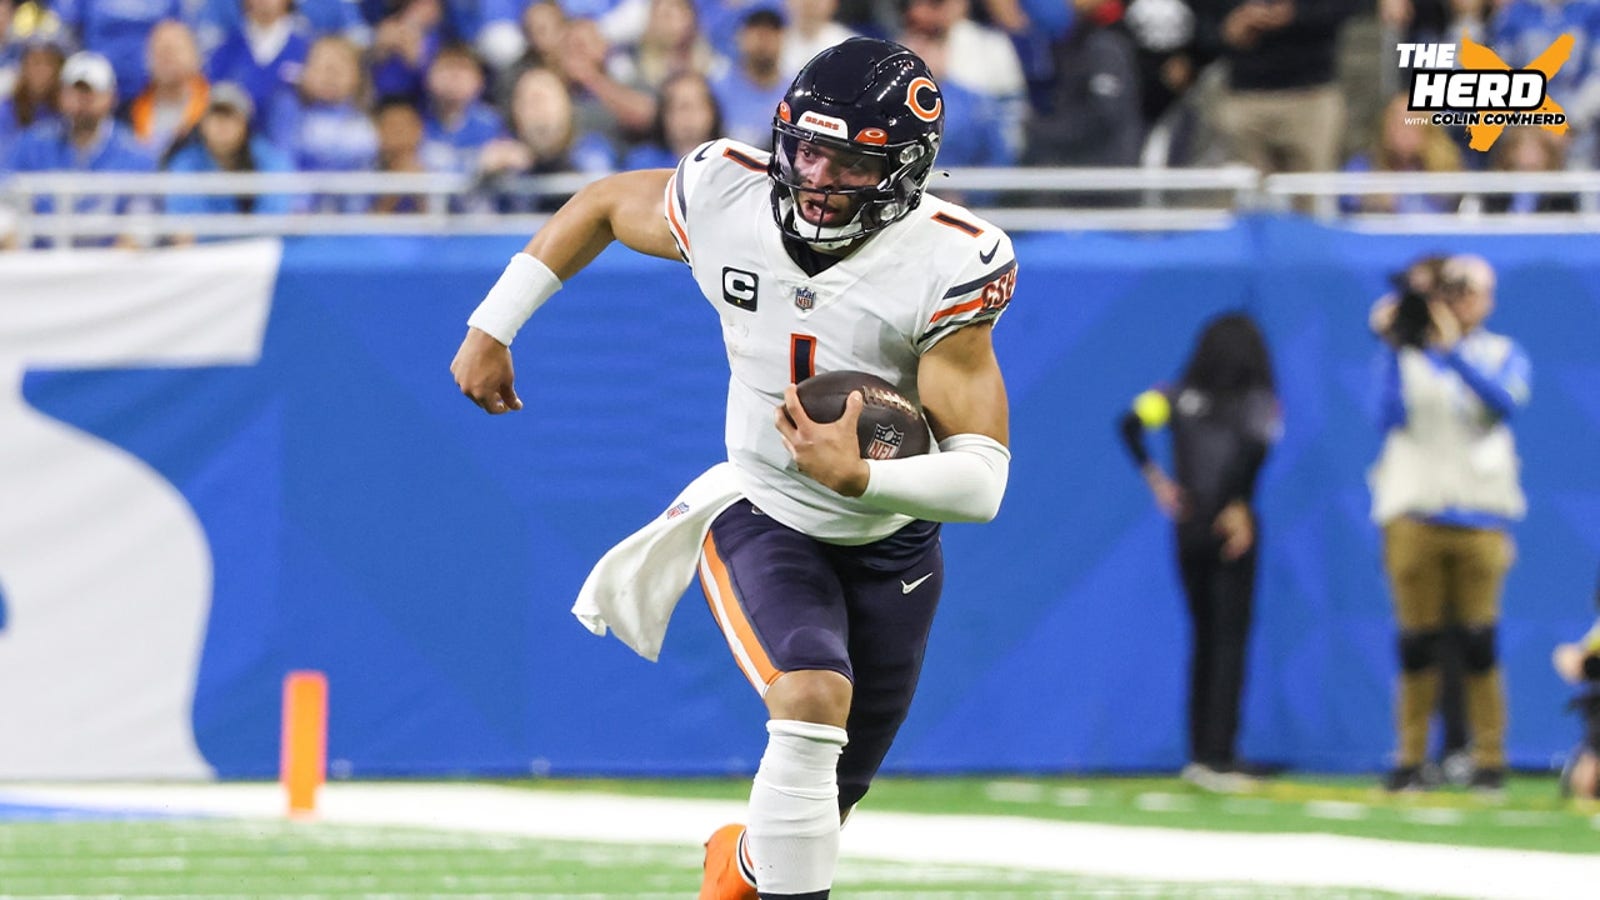 Bears reportedly 'leaning towards' trading No. 1 pick in 2023 NFL Draft